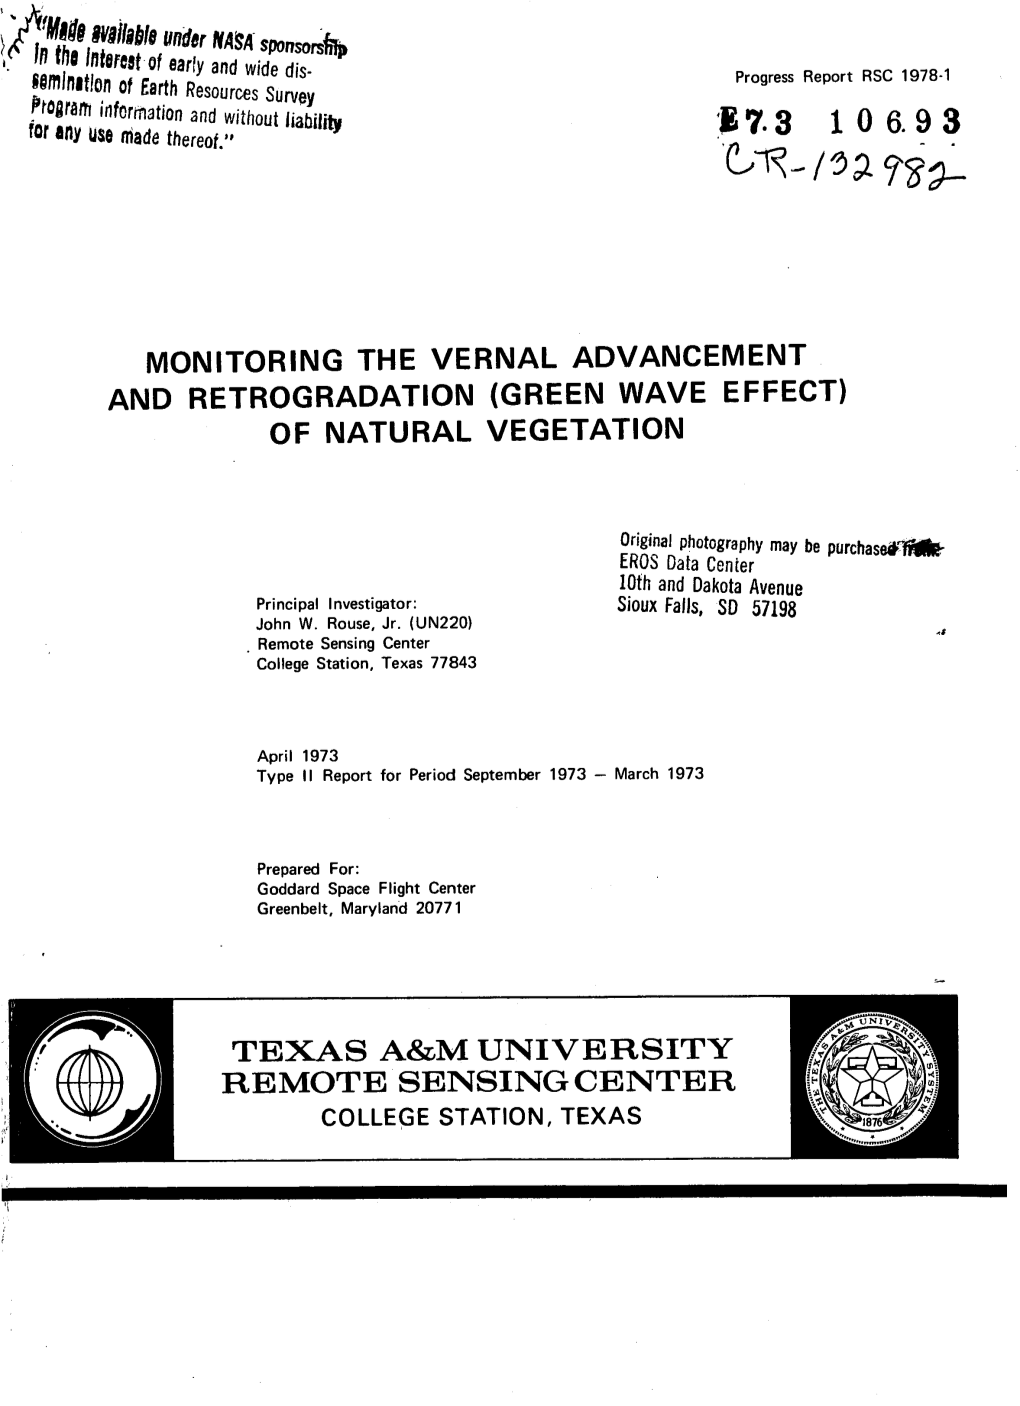 Ivd MONITORING the VERNAL ADVANCEMENT and RETROGRADATION (GREEN WAVE EFFECT) of NATURAL VEGETATION TEXAS A&M UNIVERSITY REMO